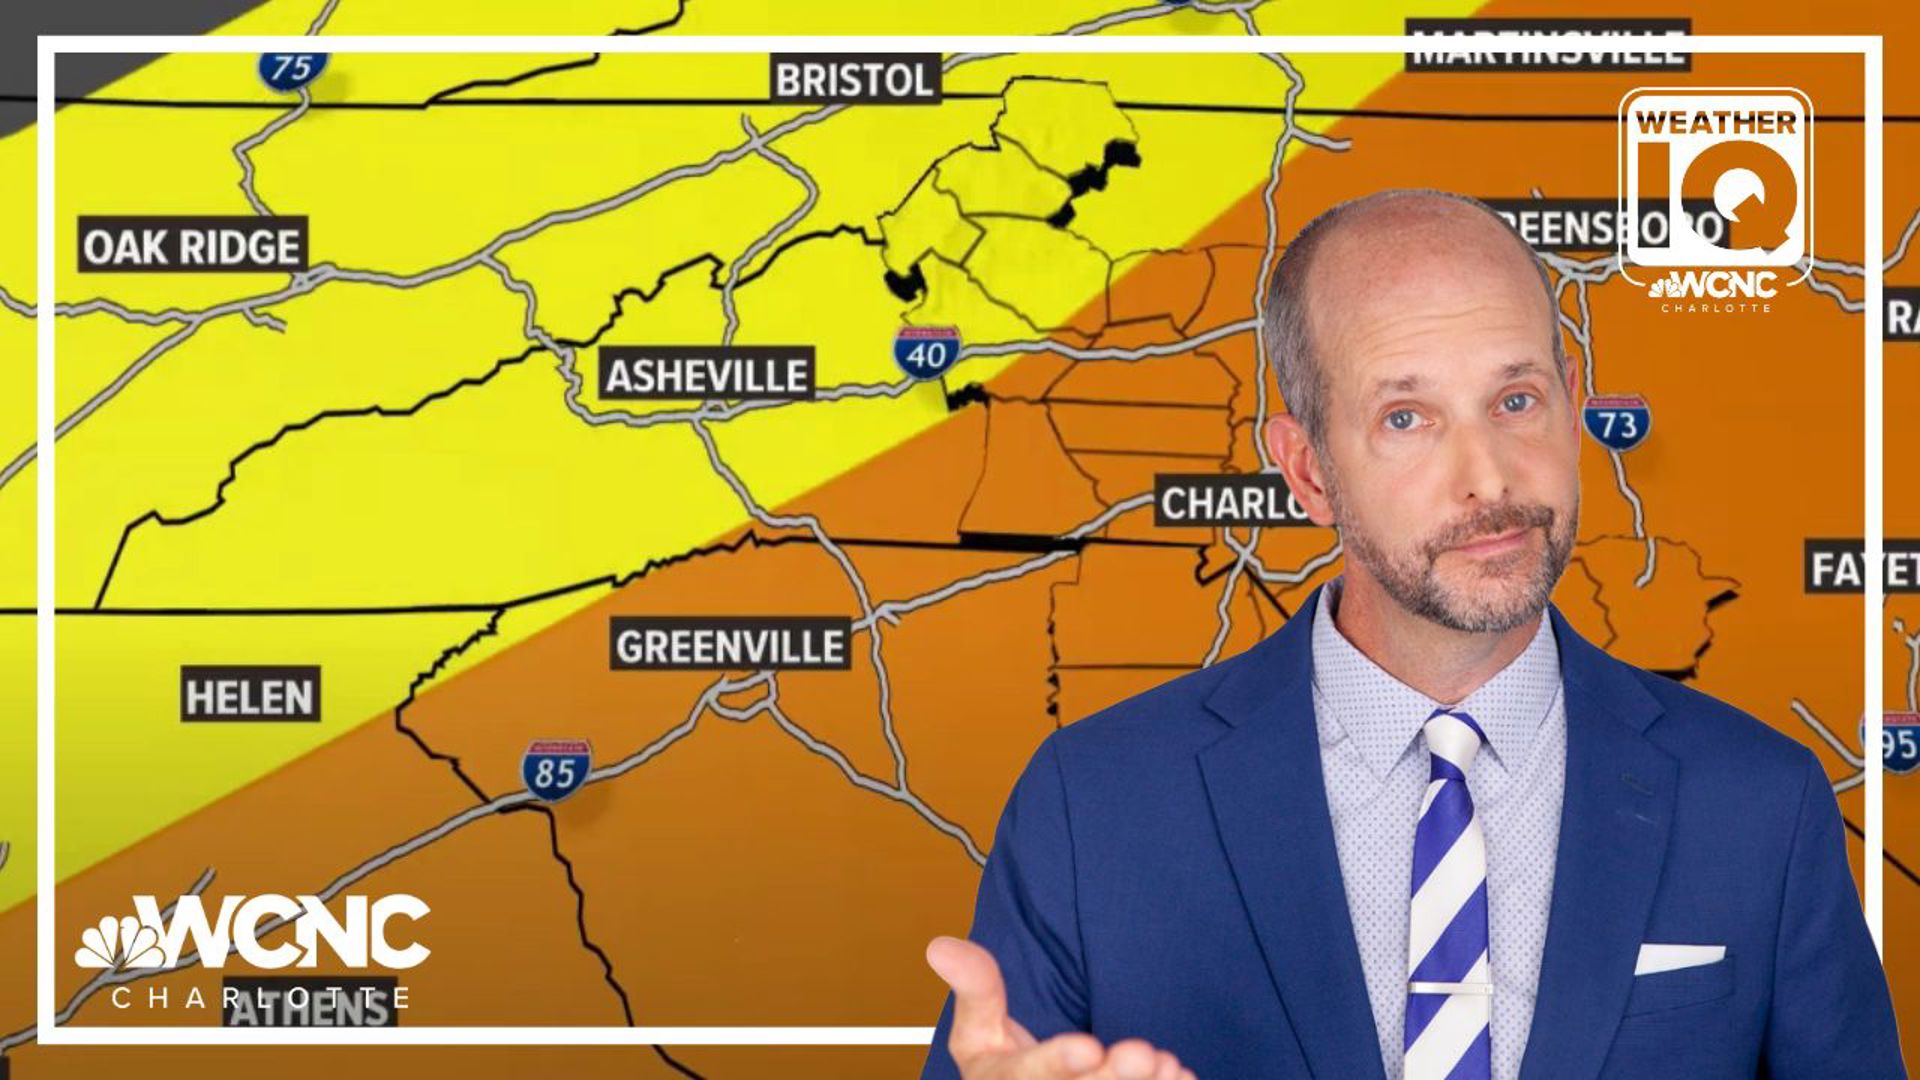 There's a risk for isolated strong storms the next two days in Charlotte with another wave of severe weather possible early Thursday, Brad Panovich says.